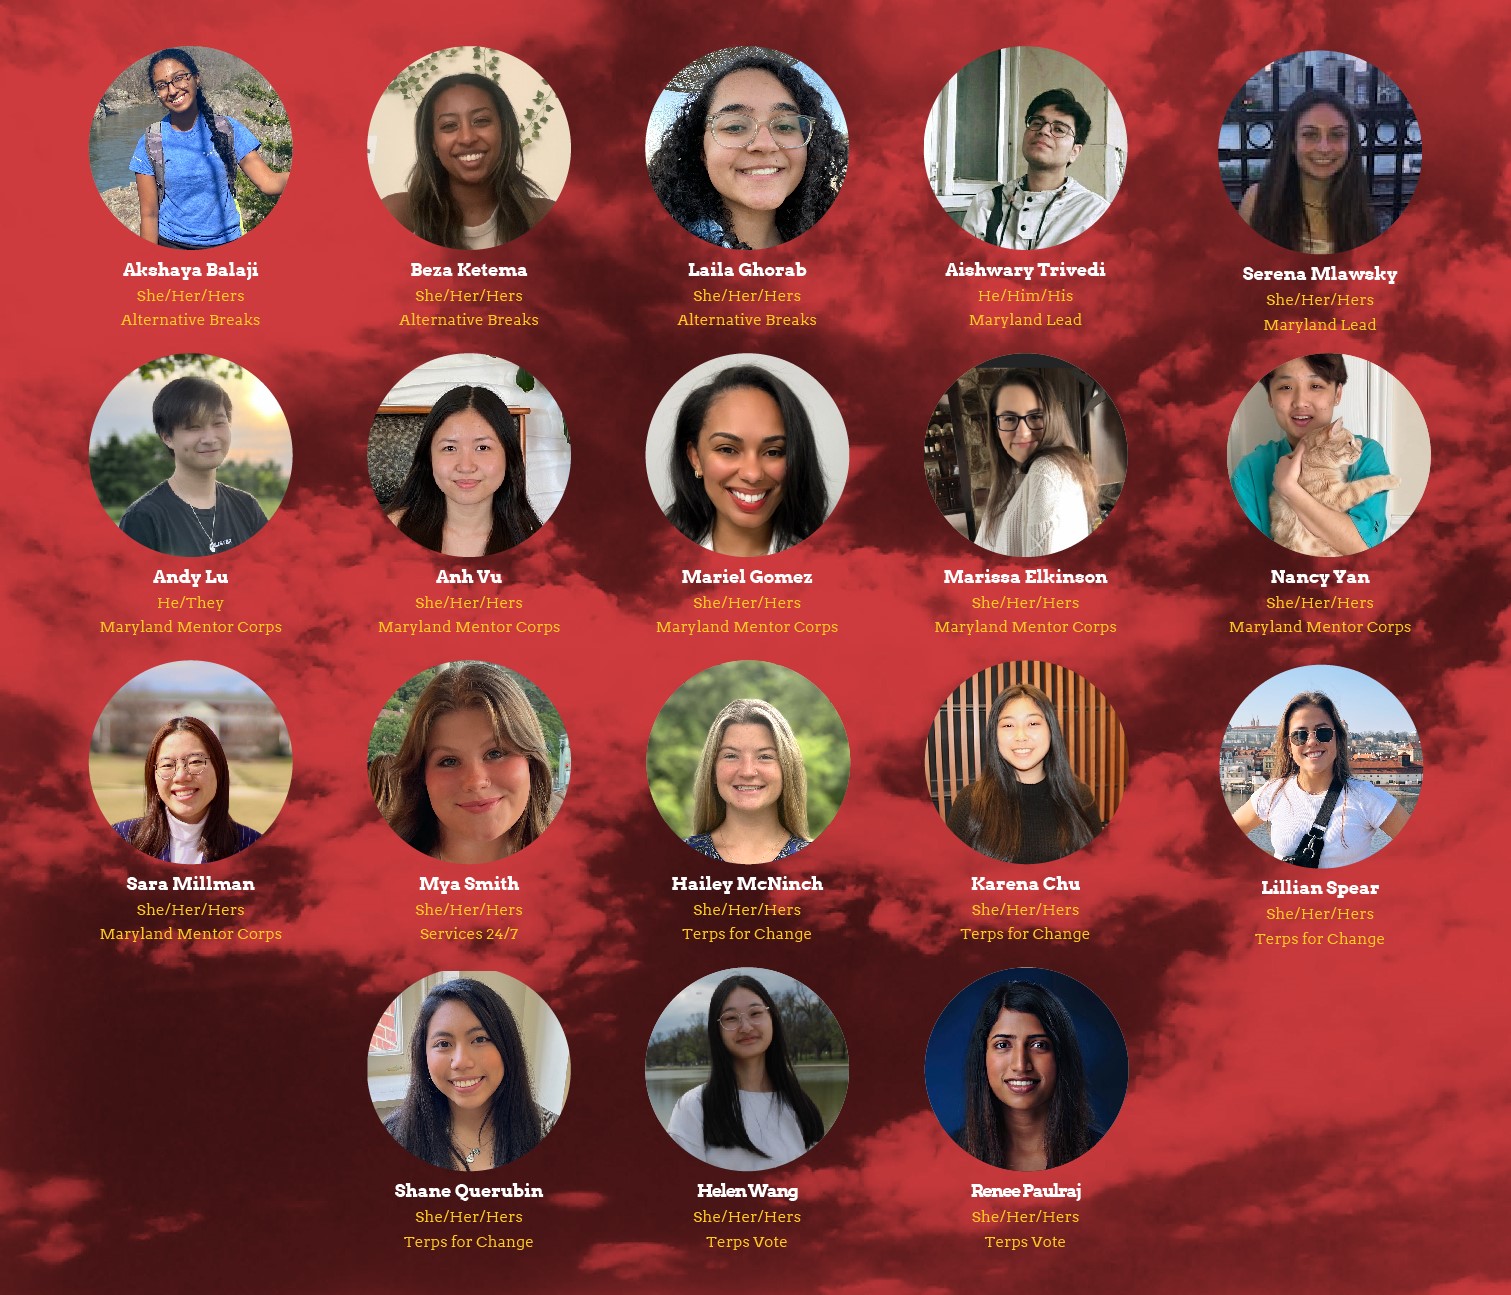 red background with headshots of 18 individual students who are interns